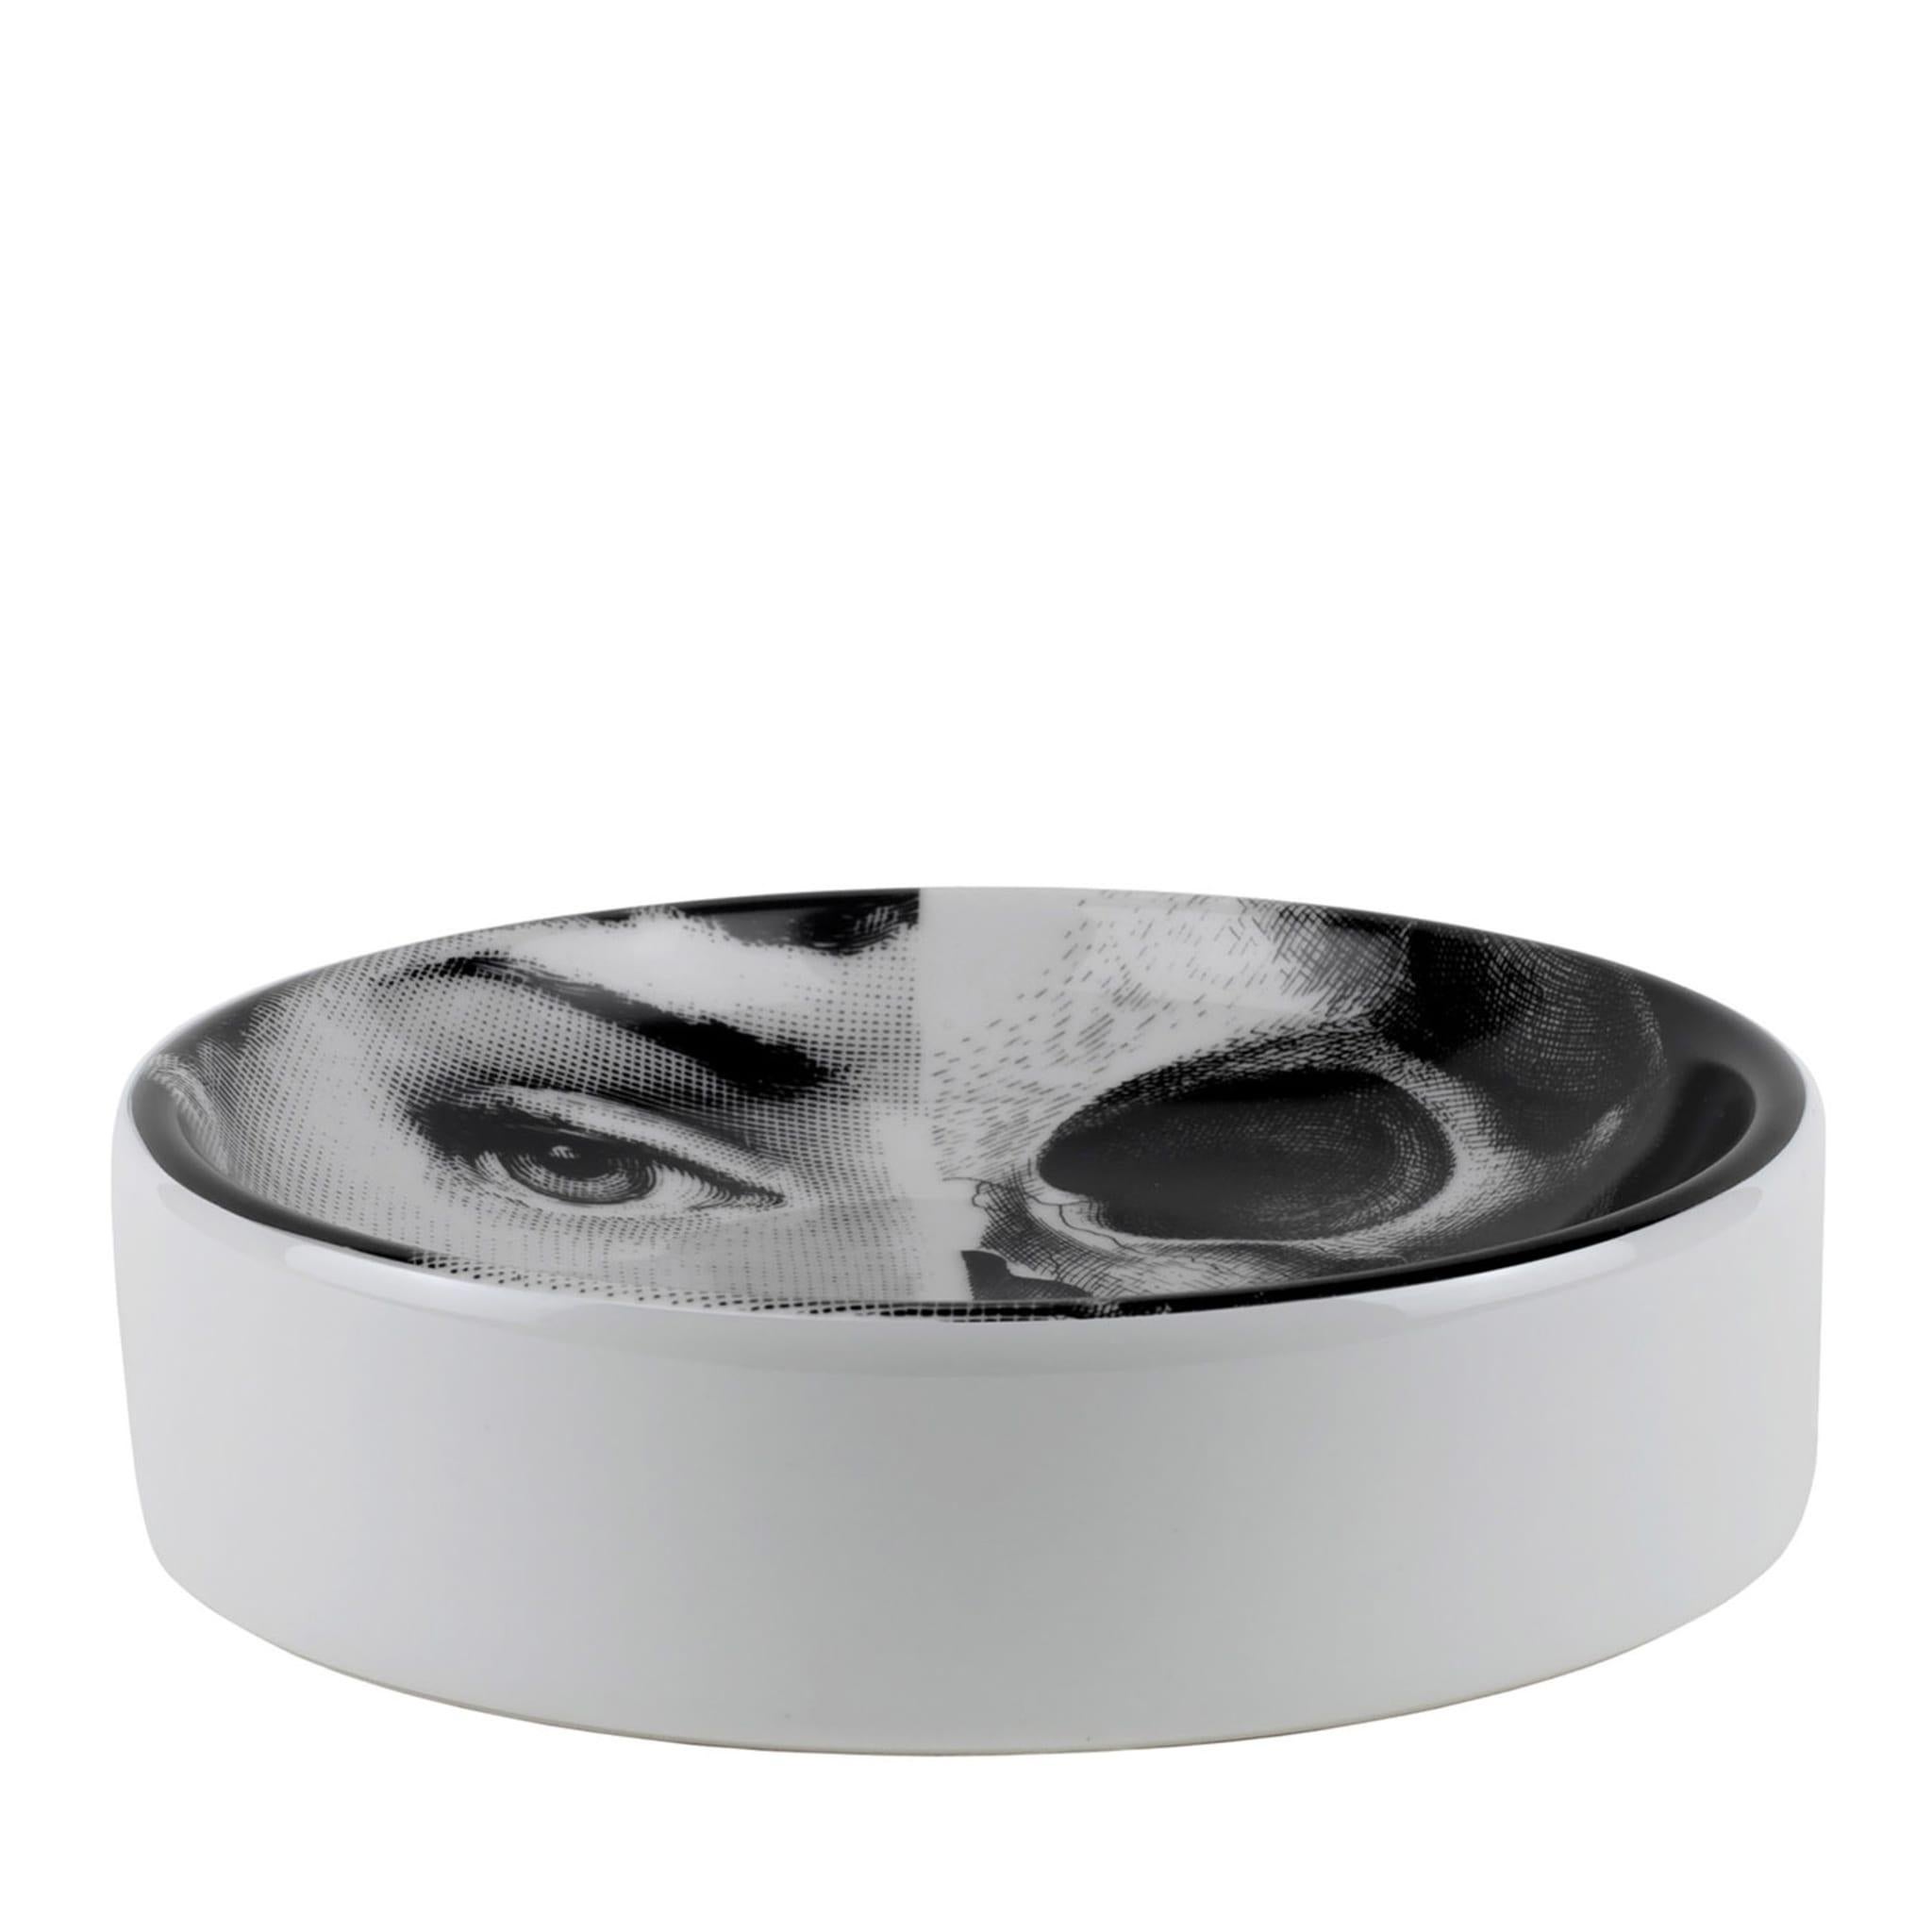 Fornasetti's reinterpretations of opera singer Lina Cavalieri's face are the basis of the iconic Tema e Variazioni series and make this hand-decorated porcelain ashtray a must-have for collectors and lovers of art alike. Any minor discrepancies